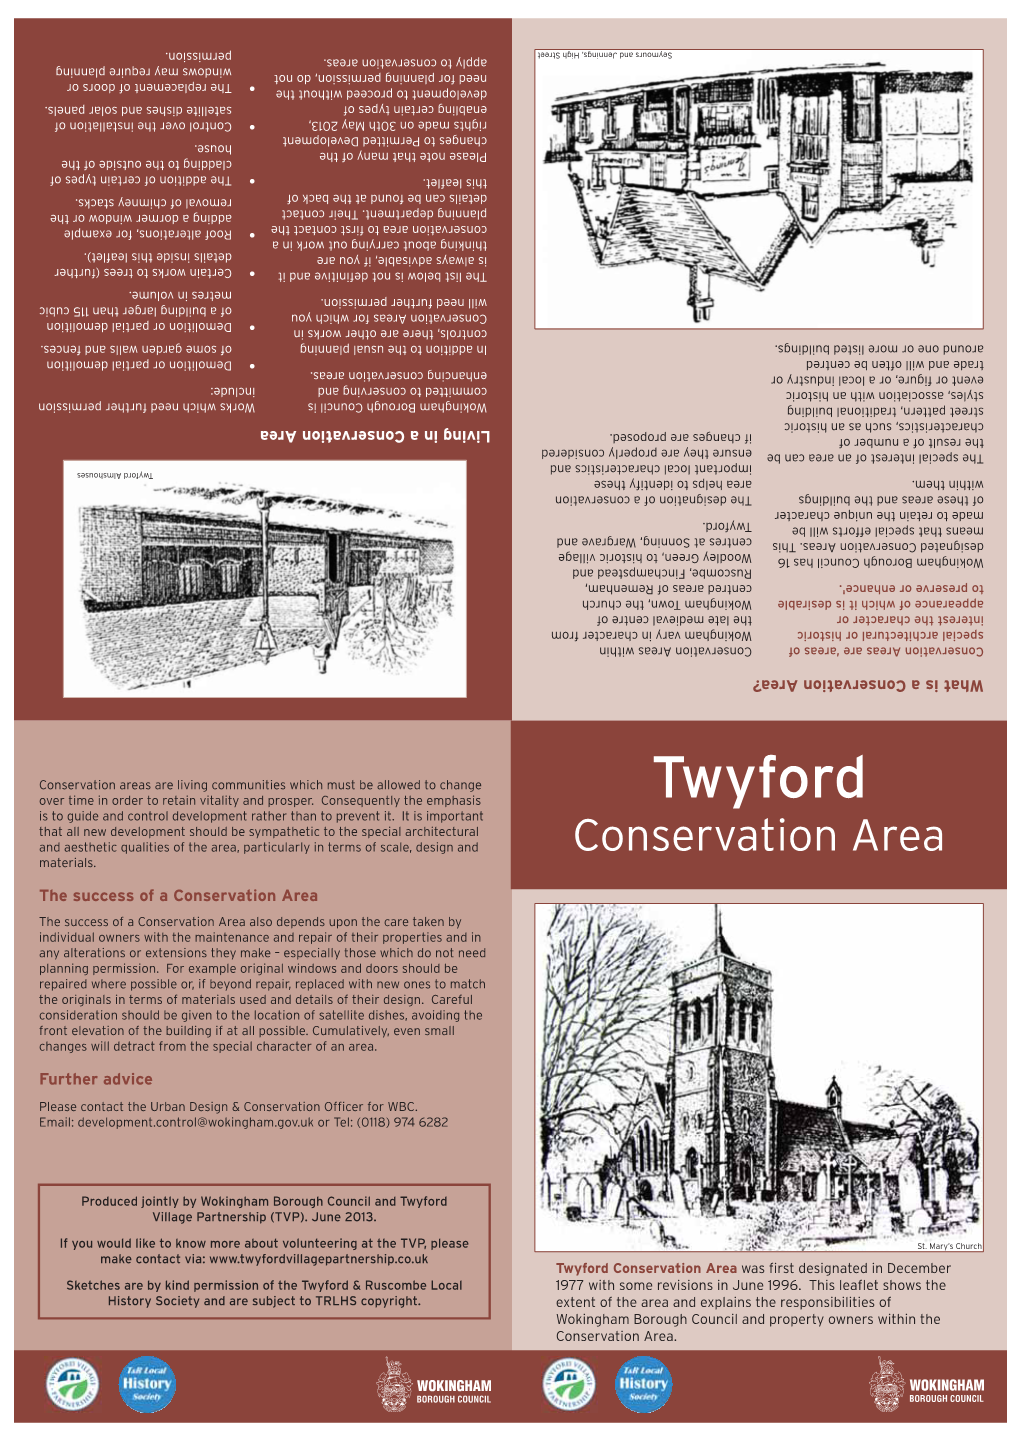 Twyford Conservation Area Was First Designated in December Sketches Are by Kind Permission of the Twyford & Ruscombe Local 1977 with Some Revisions in June 1996